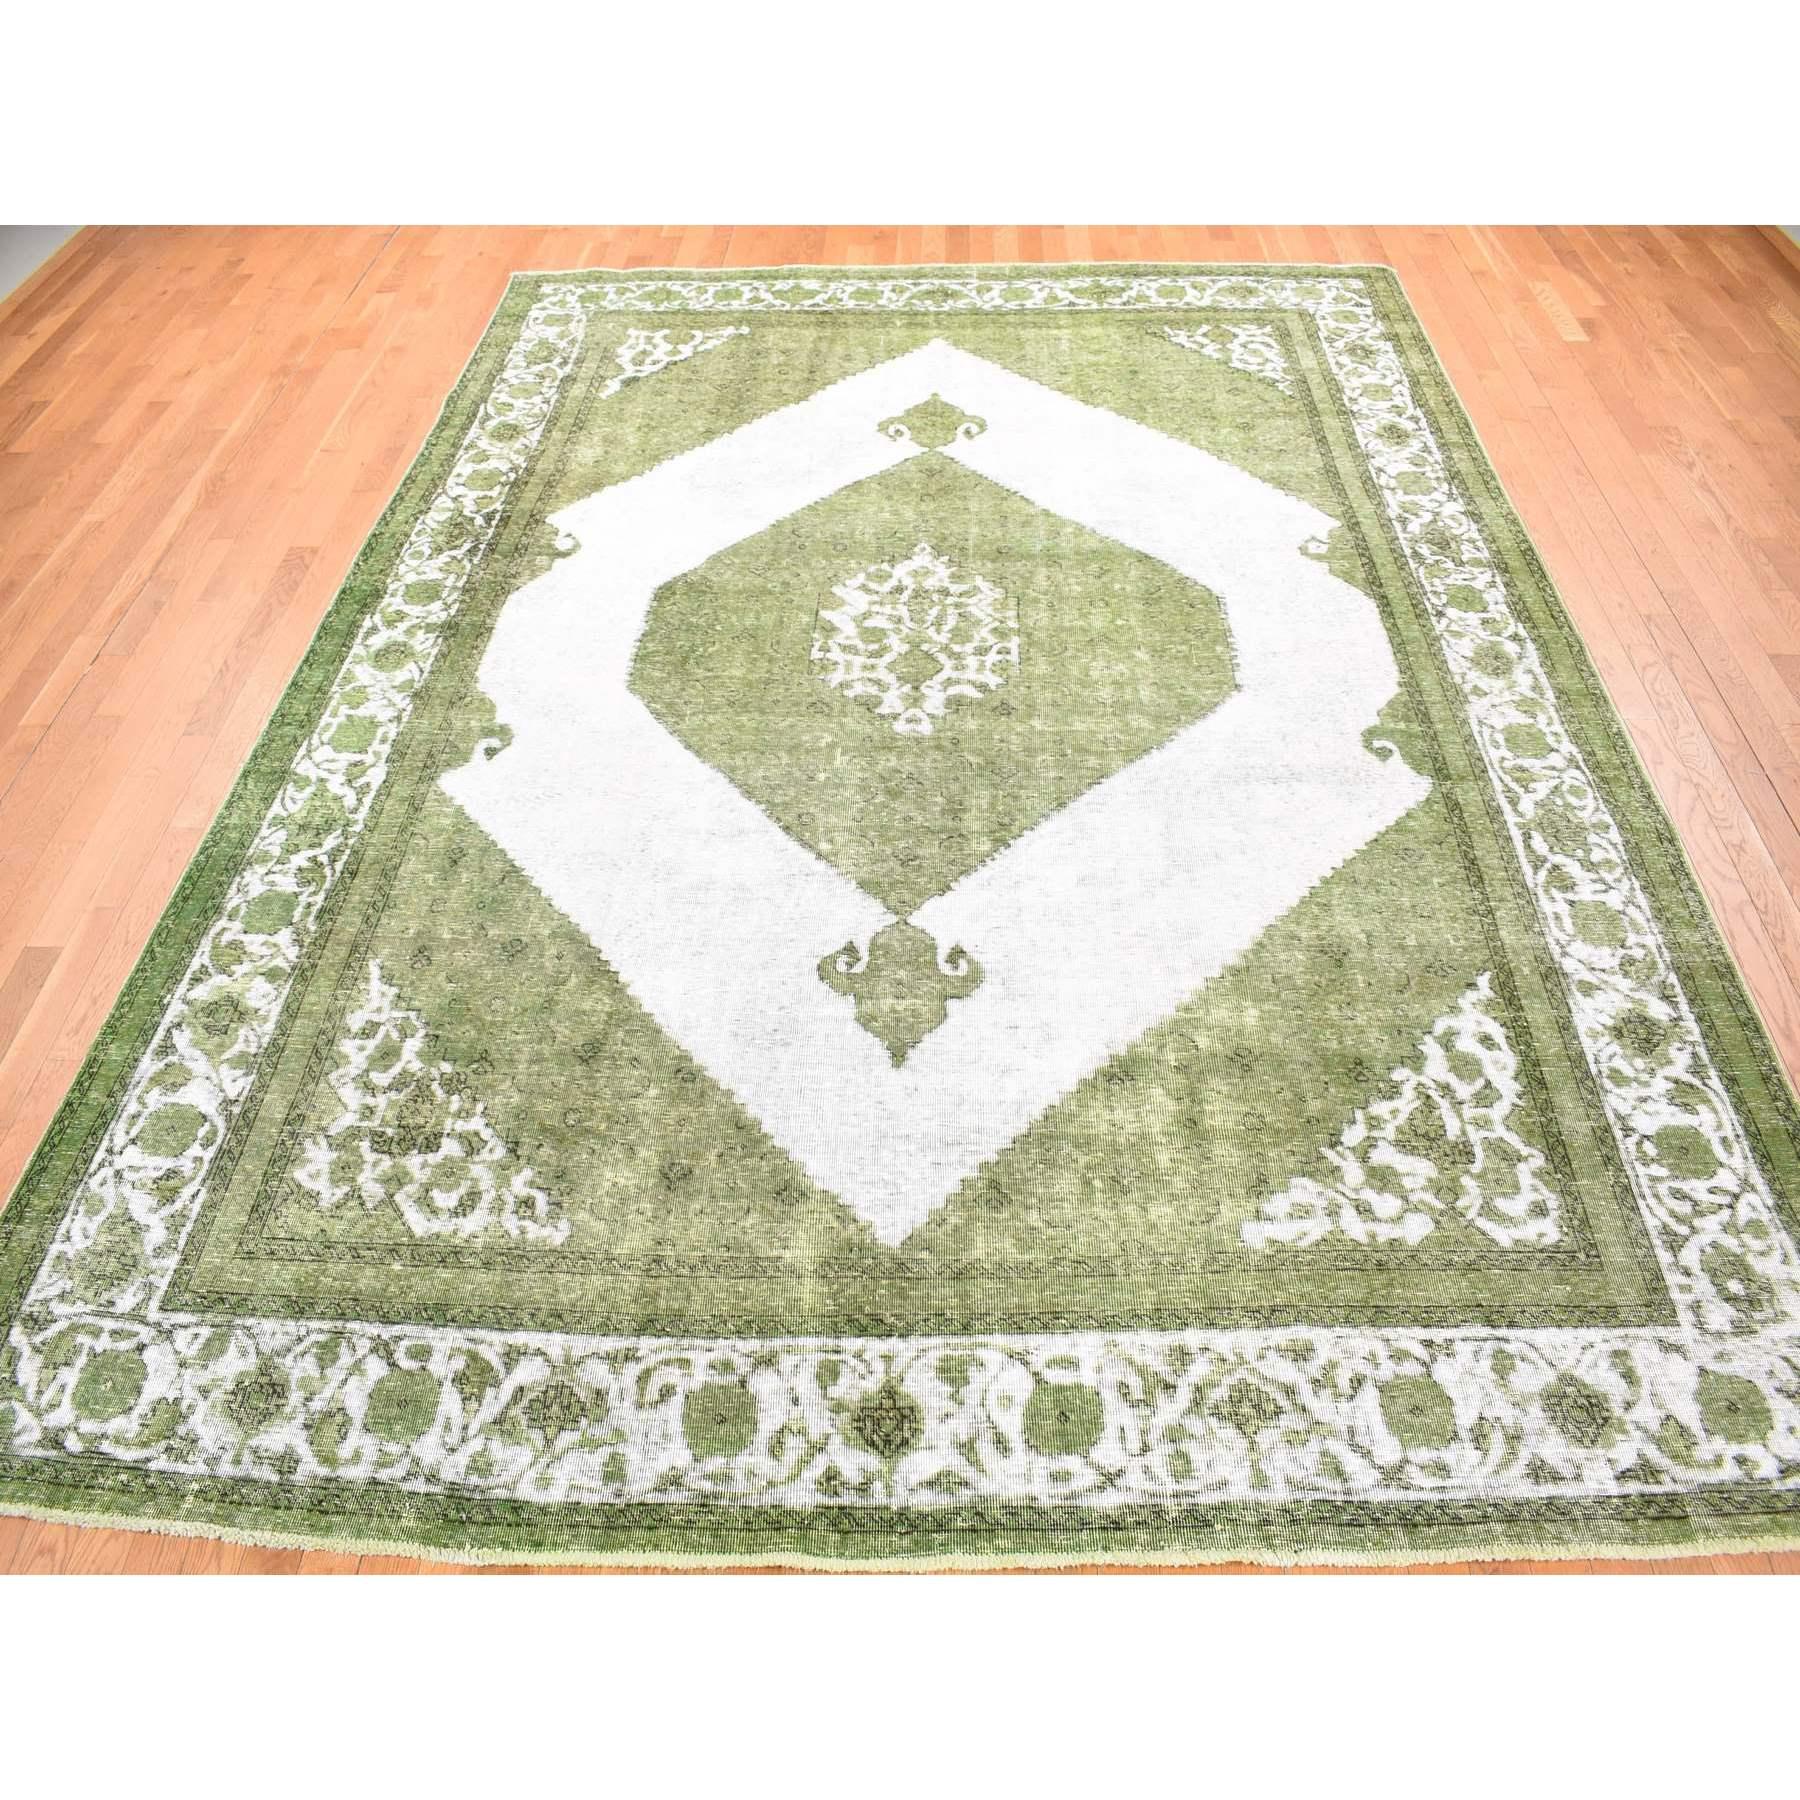 This fabulous Hand-Knotted carpet has been created and designed for extra strength and durability. This rug has been handcrafted for weeks in the traditional method that is used to make
Exact Rug Size in Feet and Inches : 10'0